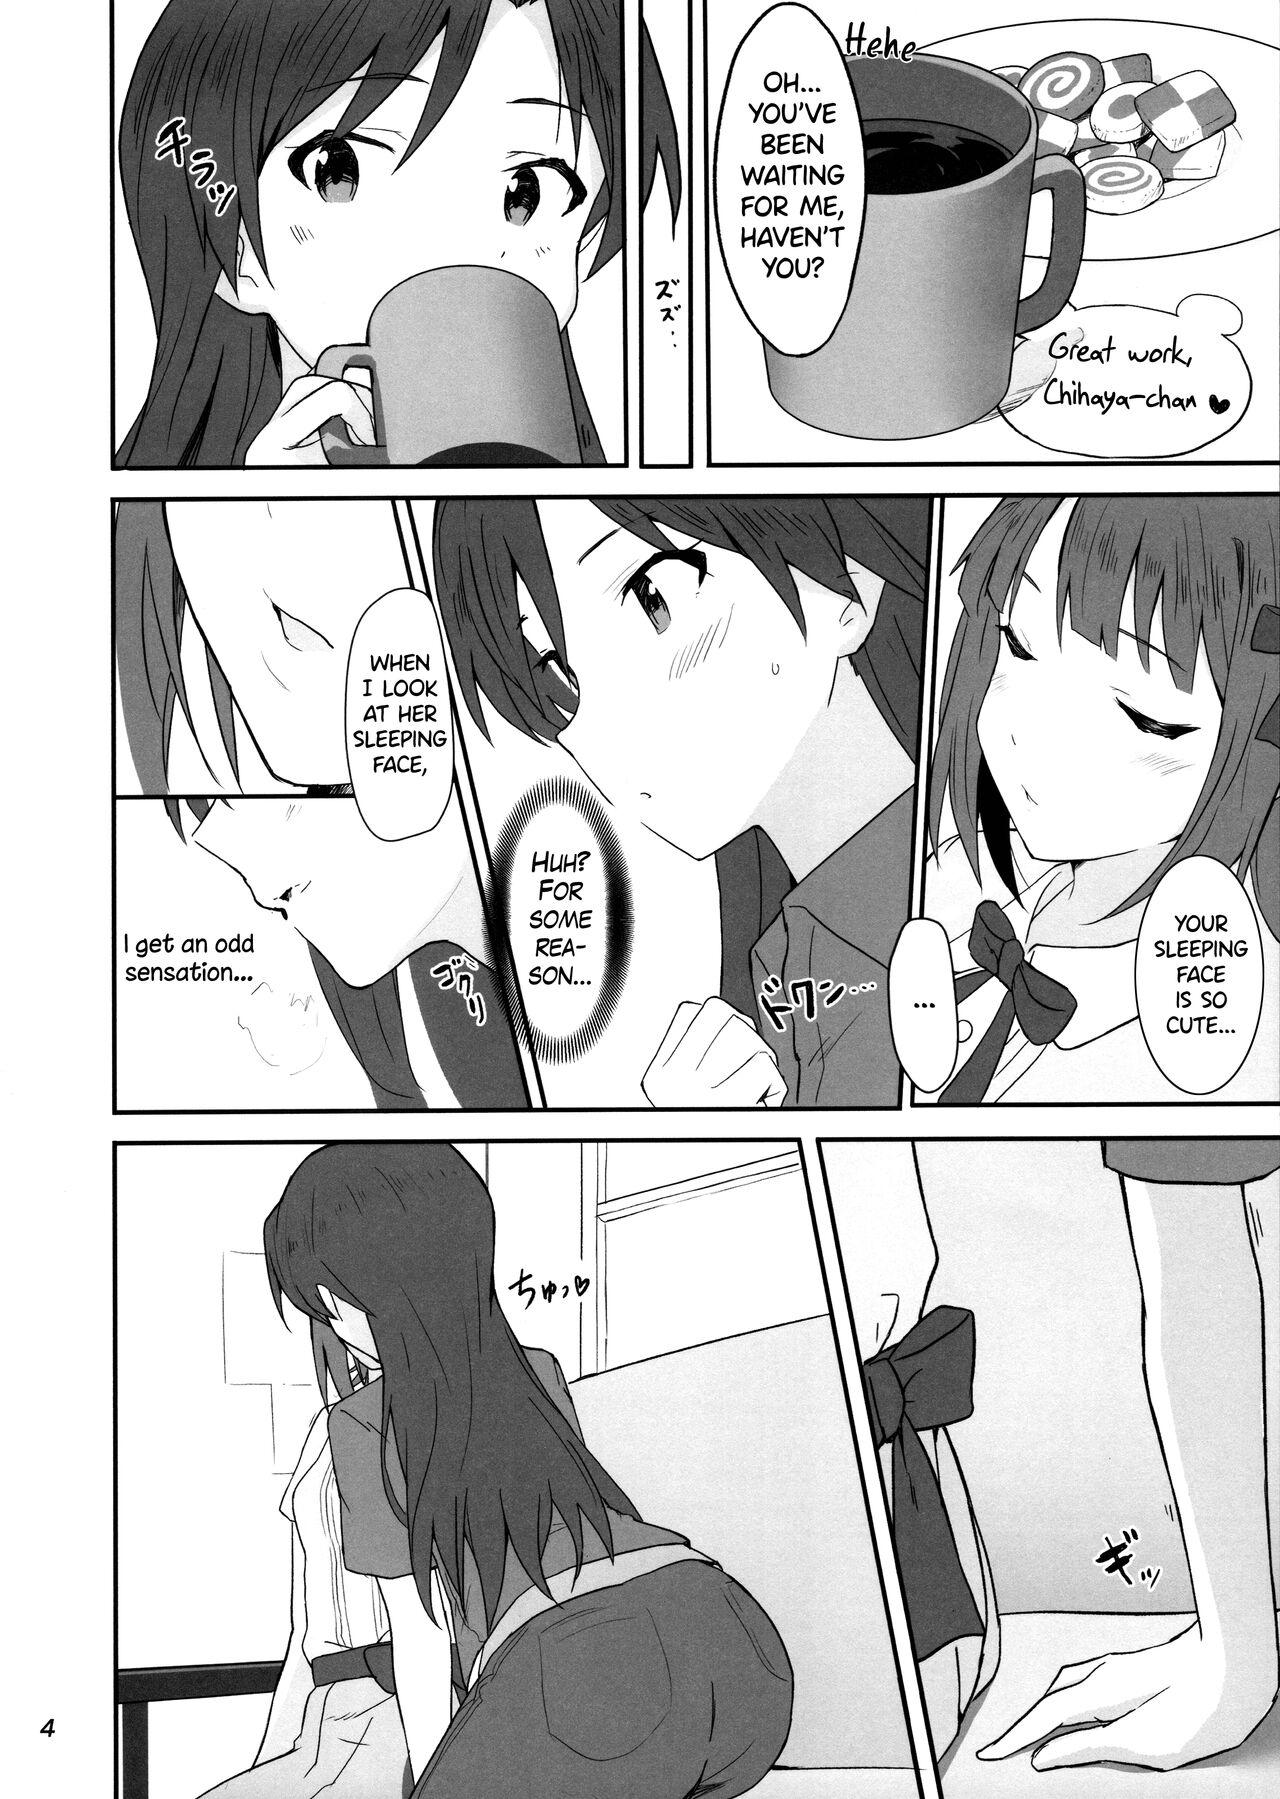 Mulata Idle running - The idolmaster Best Blowjobs - Page 3